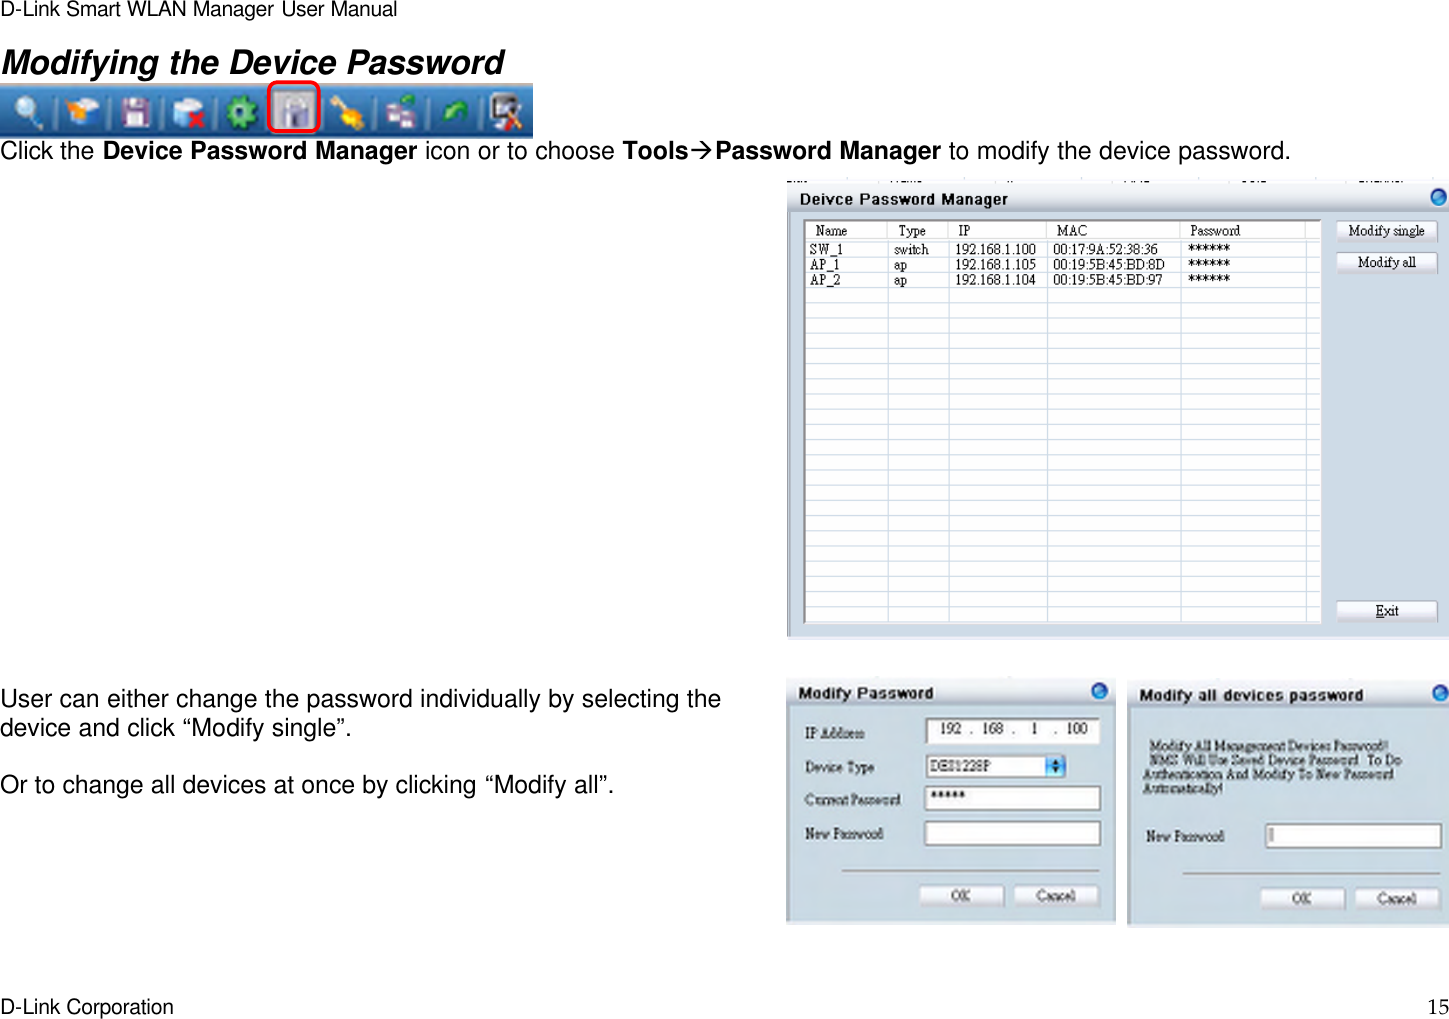 D-Link Smart WLAN Manager User Manual  D-Link Corporation    15  Modifying the Device Password  Click the Device Password Manager icon or to choose ToolsàPassword Manager to modify the device password.                   User can either change the password individually by selecting the device and click “Modify single”.  Or to change all devices at once by clicking “Modify all”.   